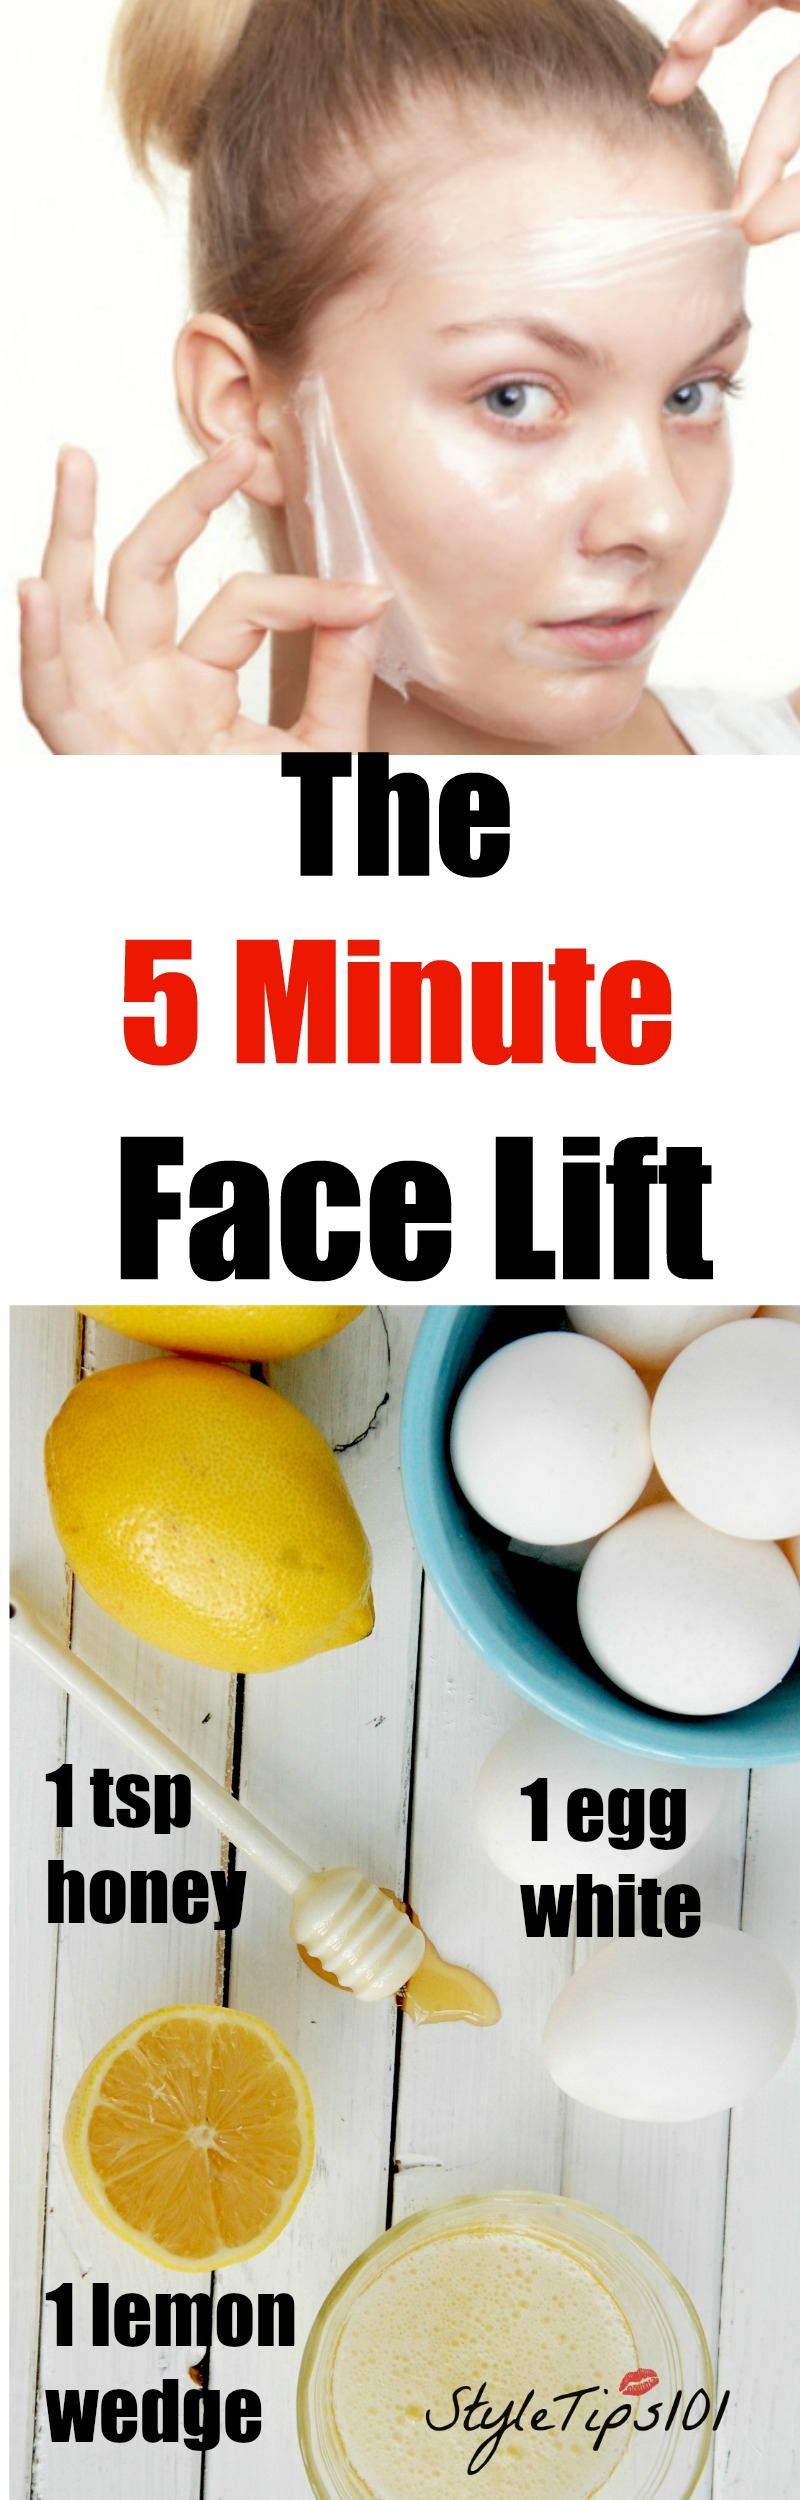 5 minute face lift